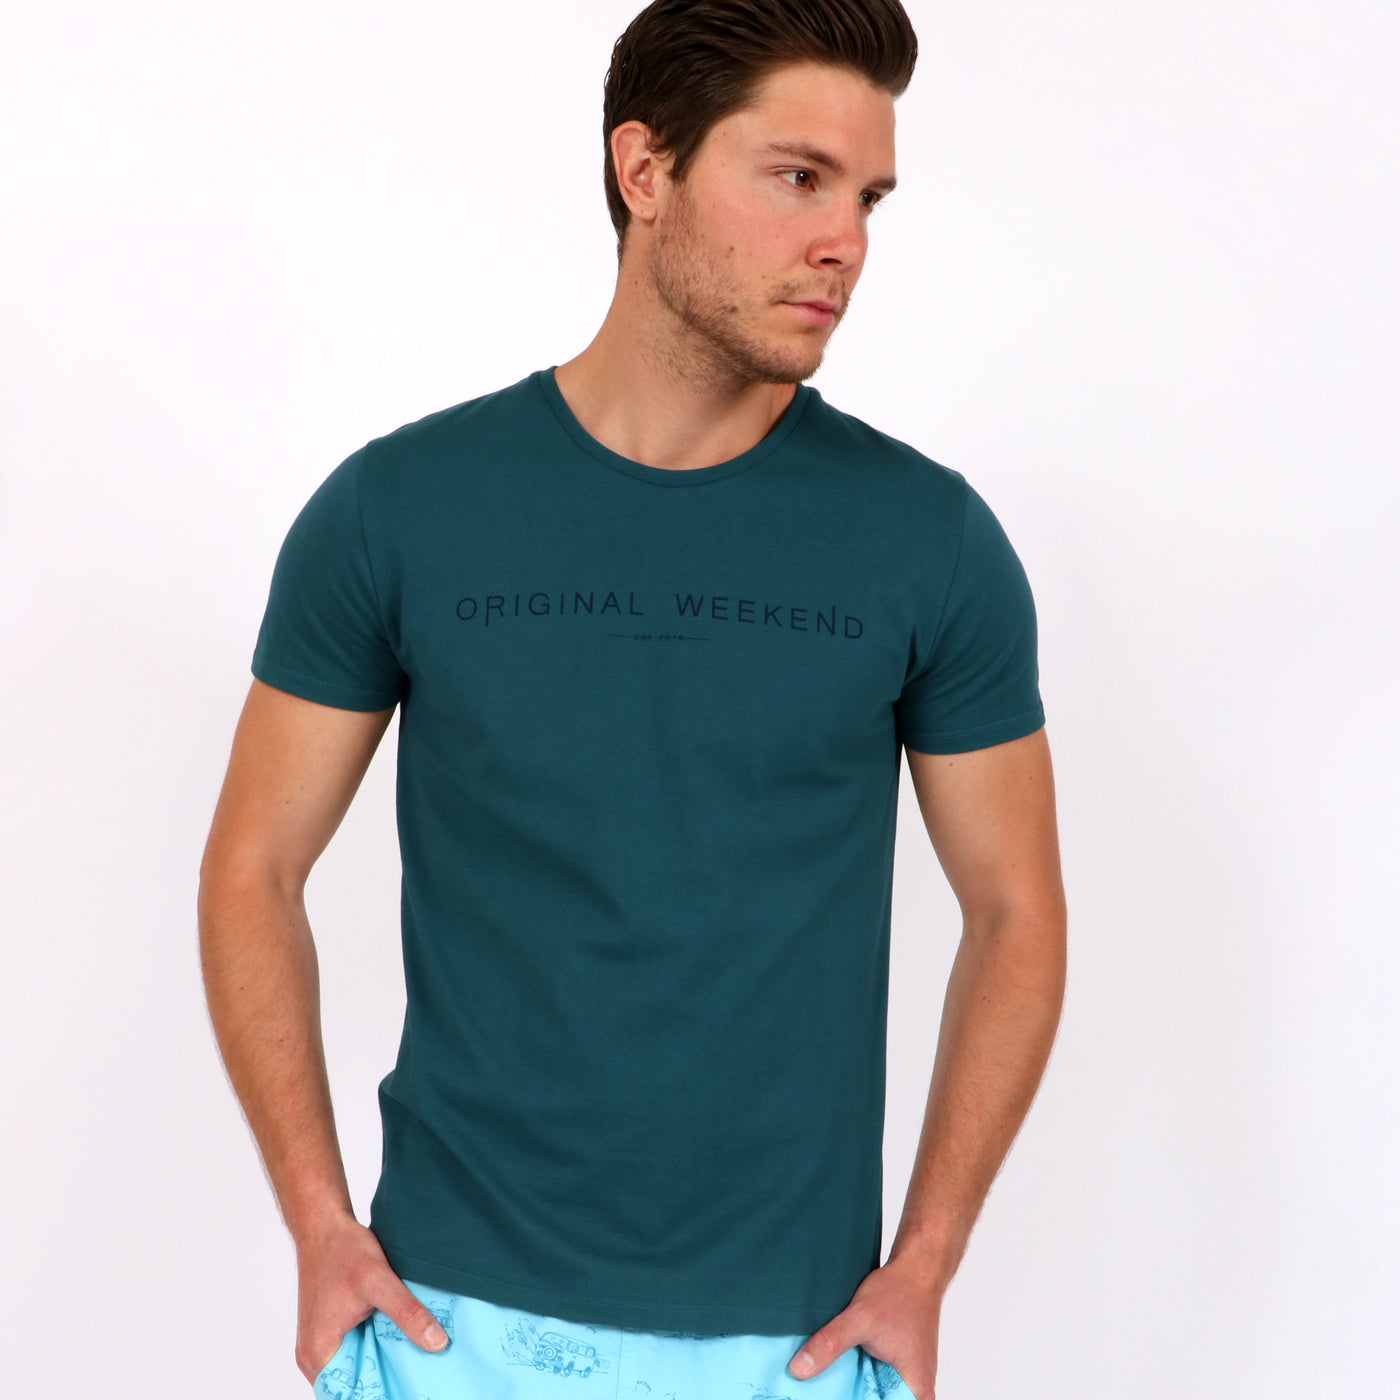 OWTS1802 Atlantic Green men's organic cotton t-shirt with logo print on body front view